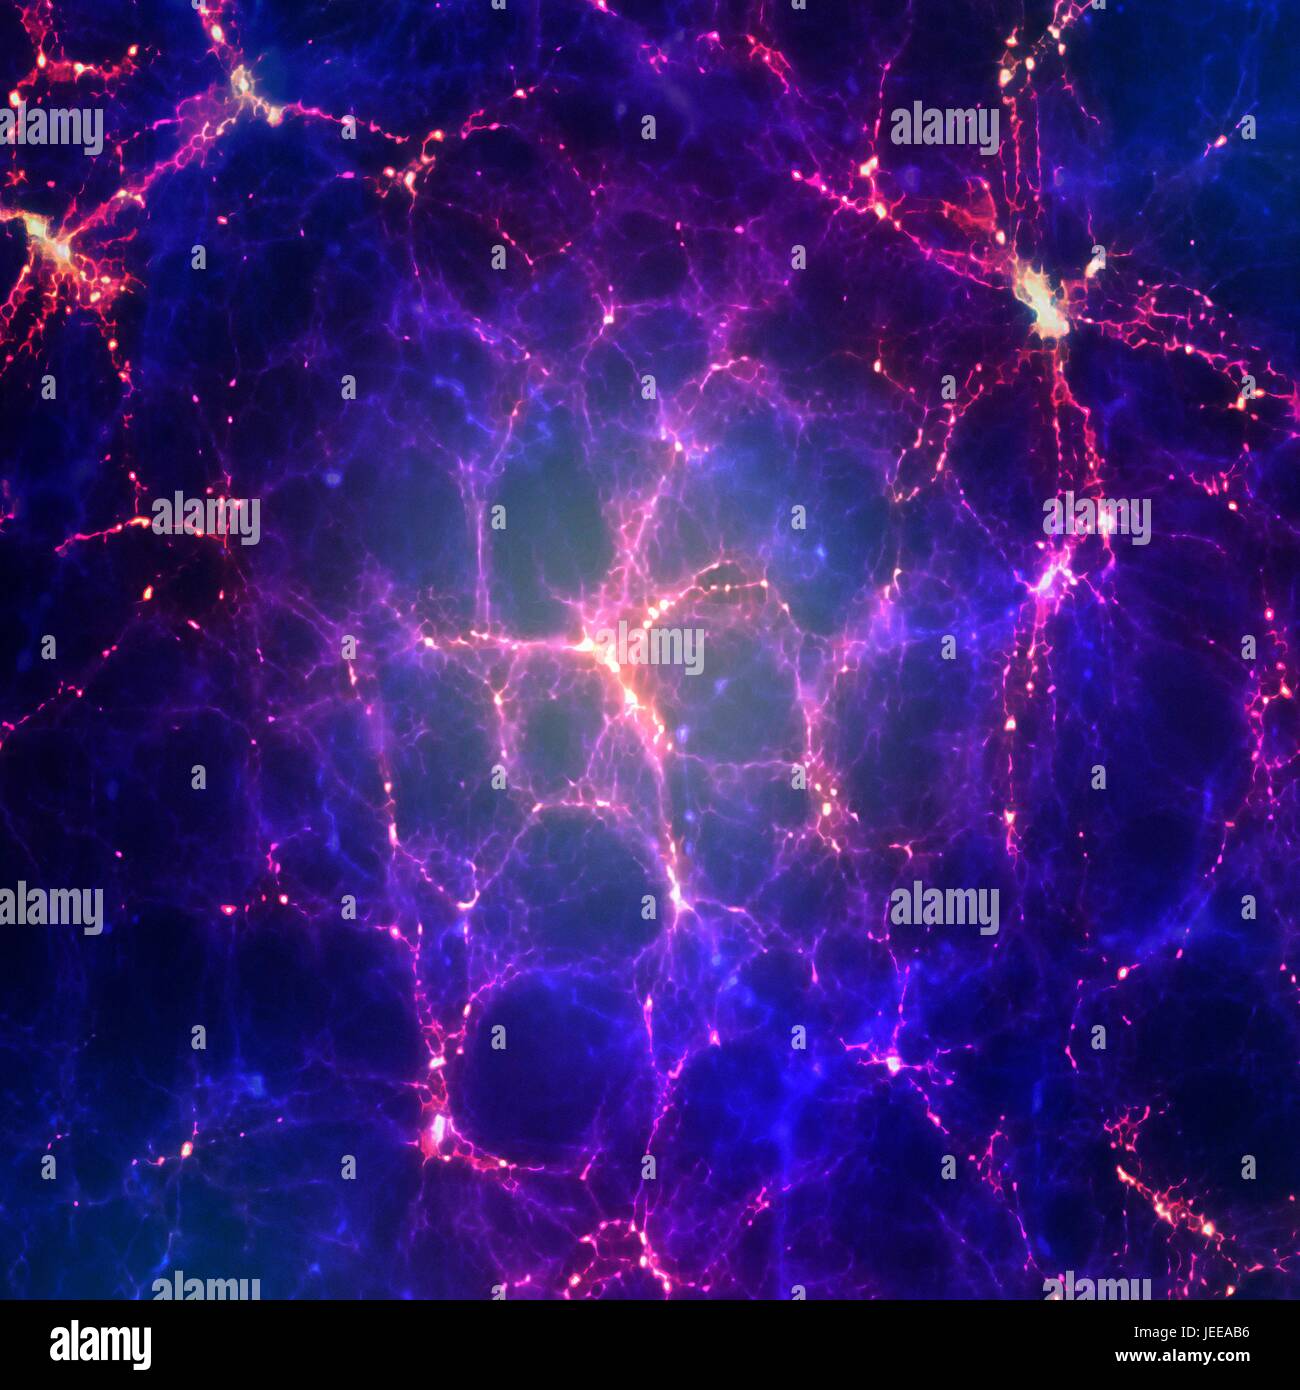 An impression of the large-scale structure of the universe, showing galaxy clusterrs and superclusters arranged in long filaments and concentrated at nodes. Stock Photo